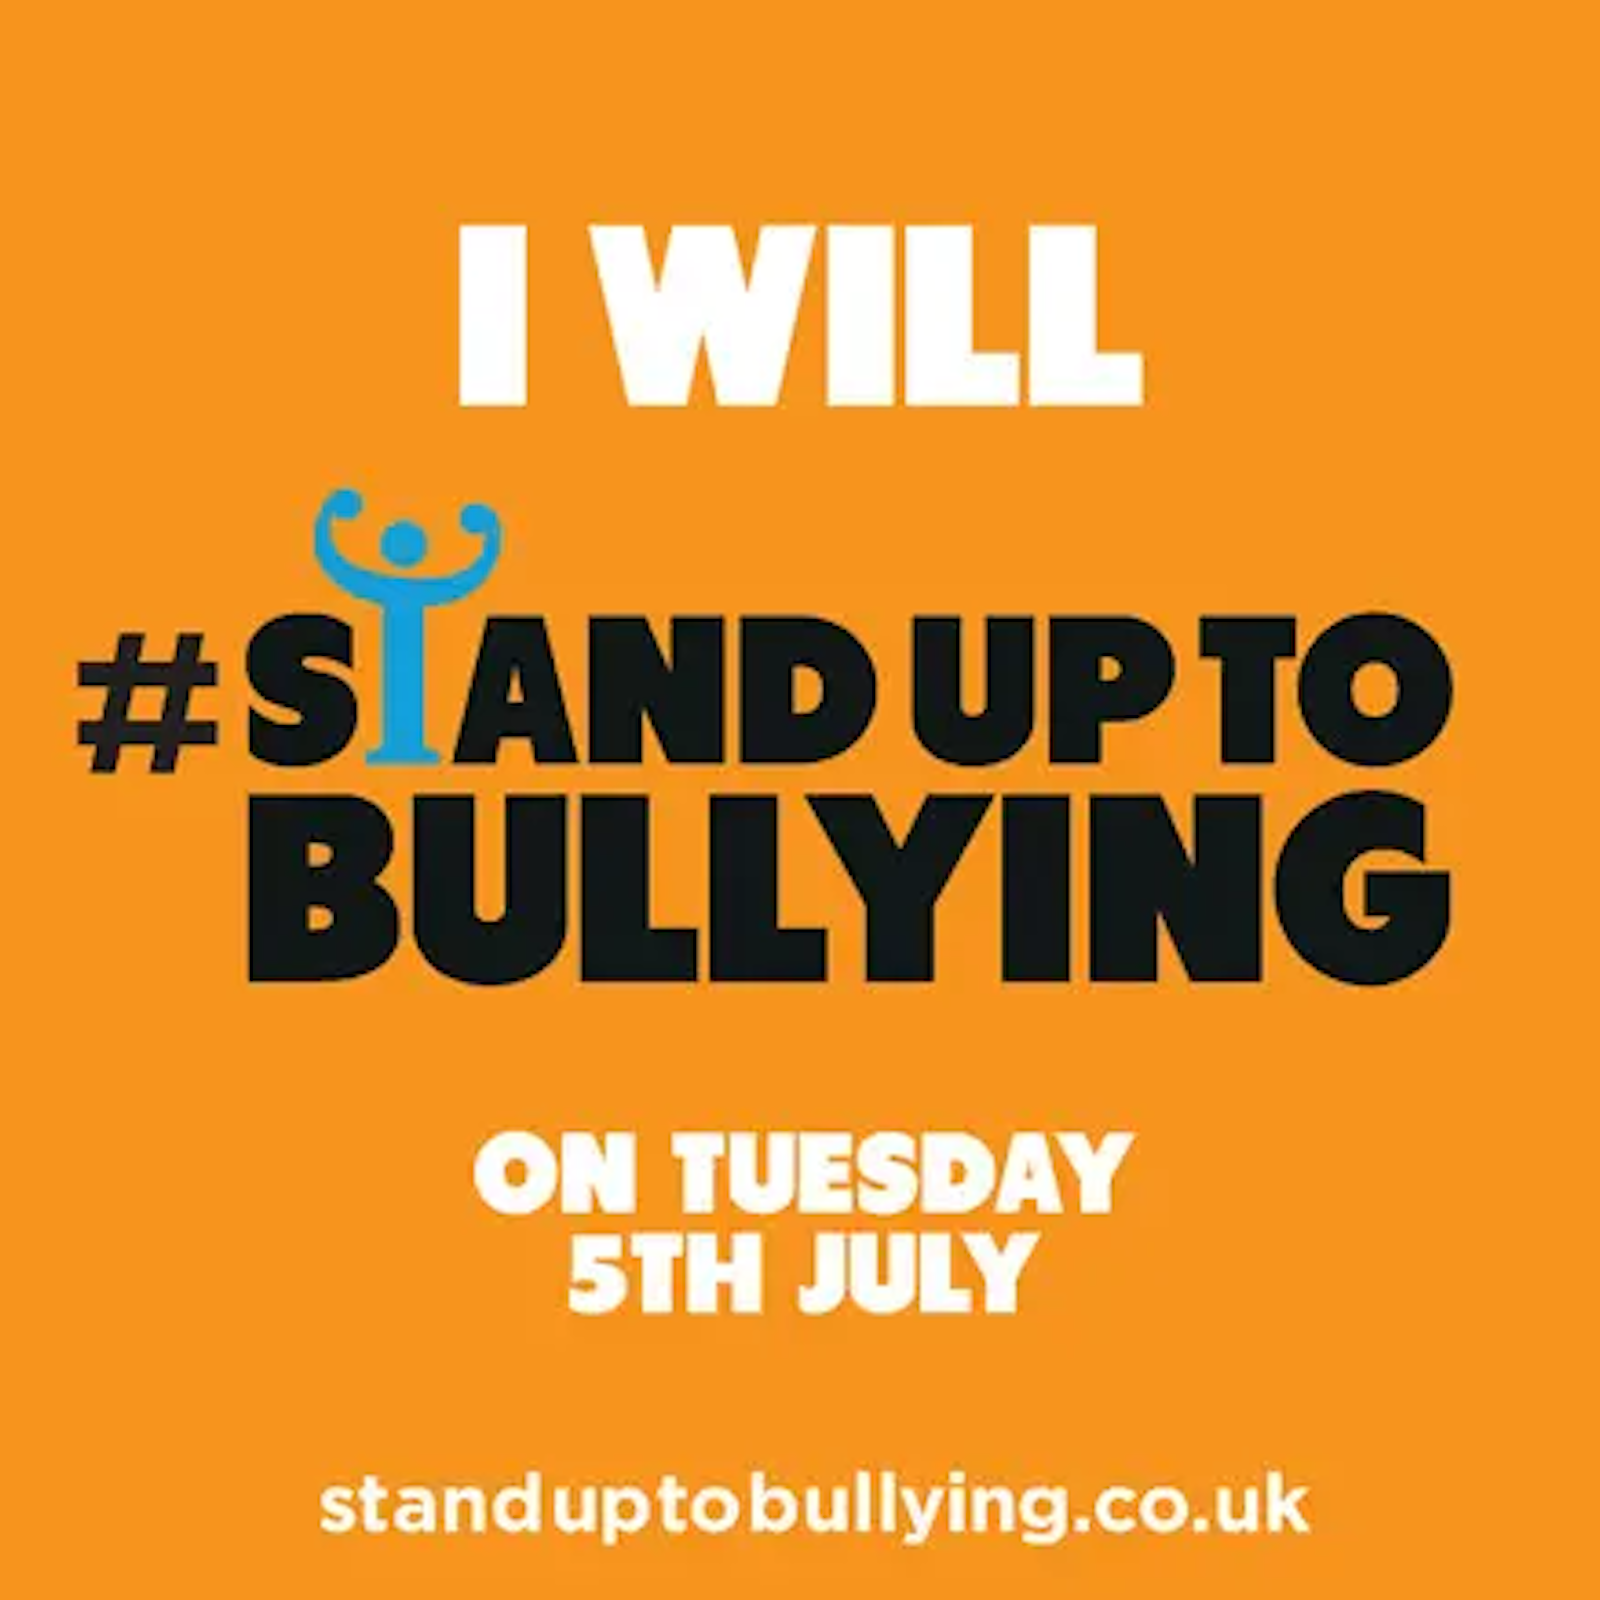 “I was badly bullied at school both verbally and cyberbullying and don’t want anyone else to go through the same experience so I took action.”